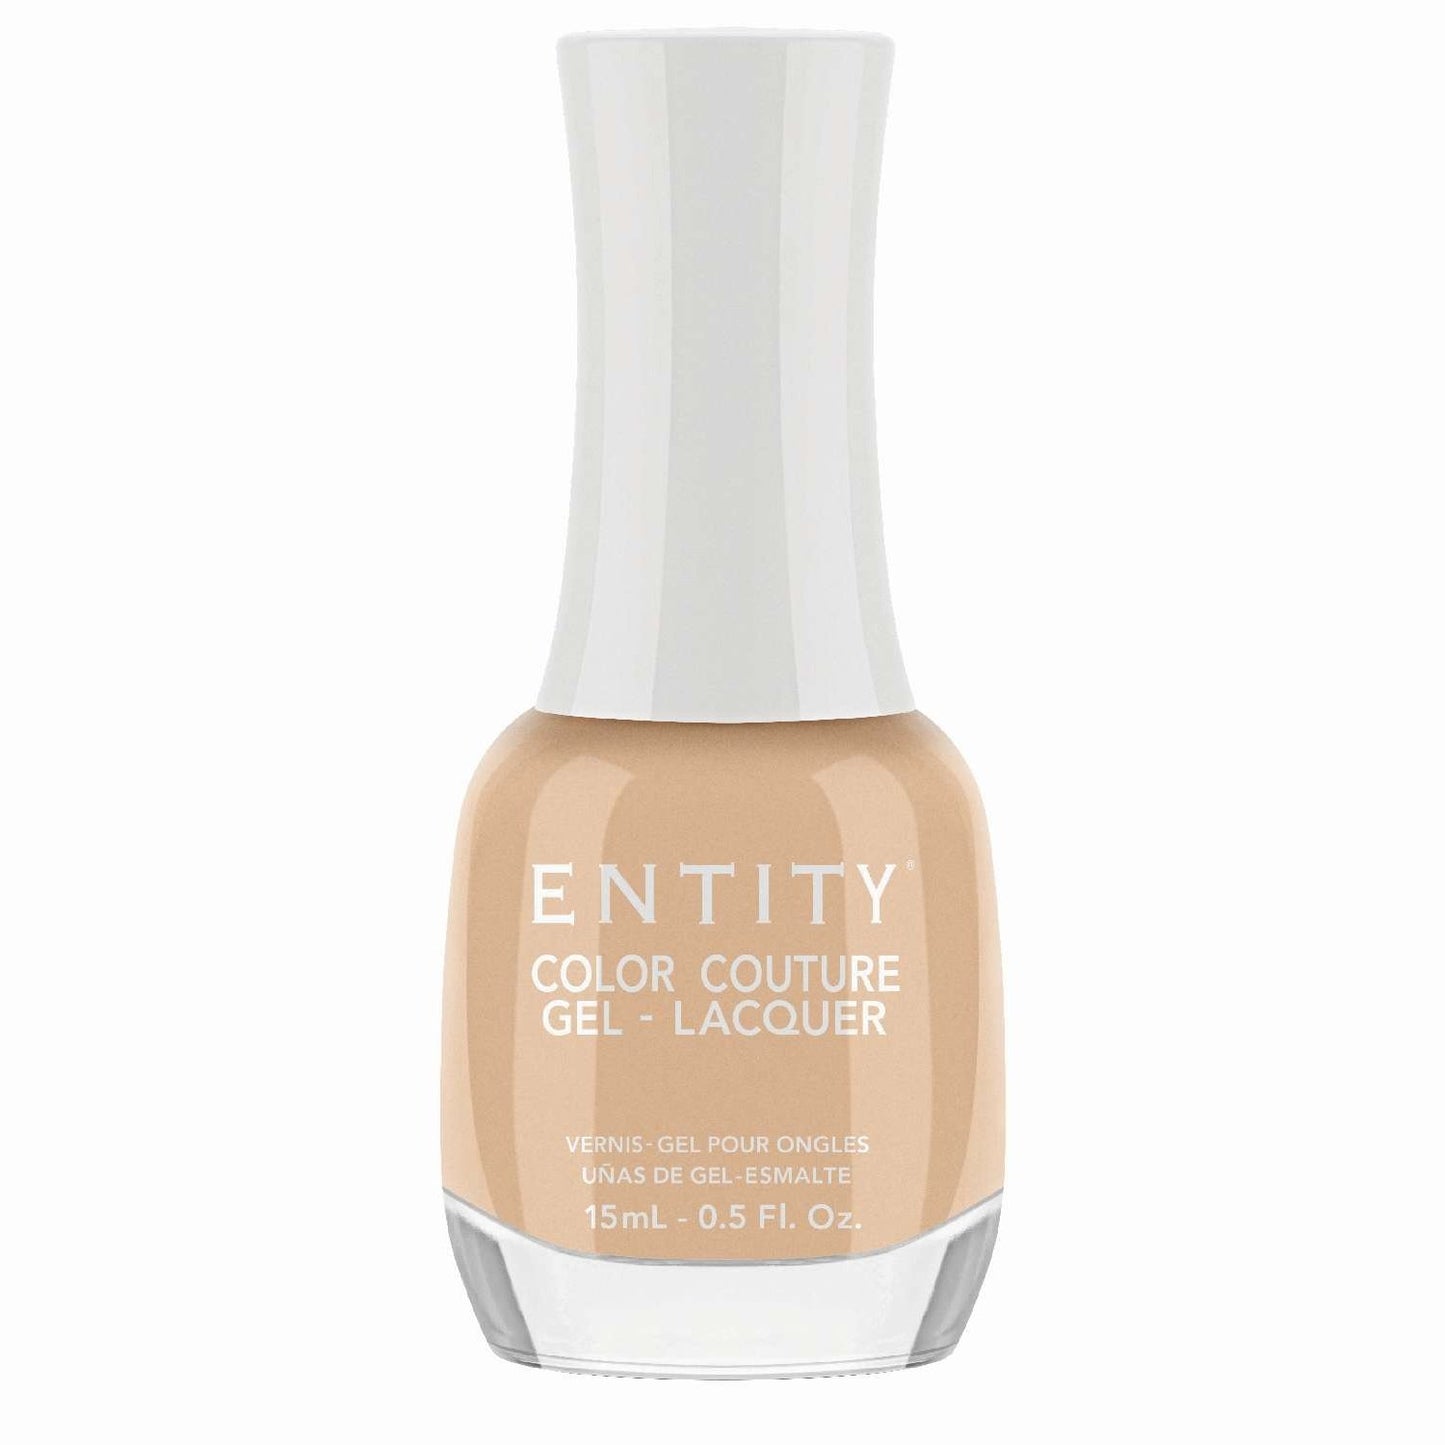 Entity Color Couture Gel Lacquer Beauty Icon 609 Natural Look 0.5 Fl Oz